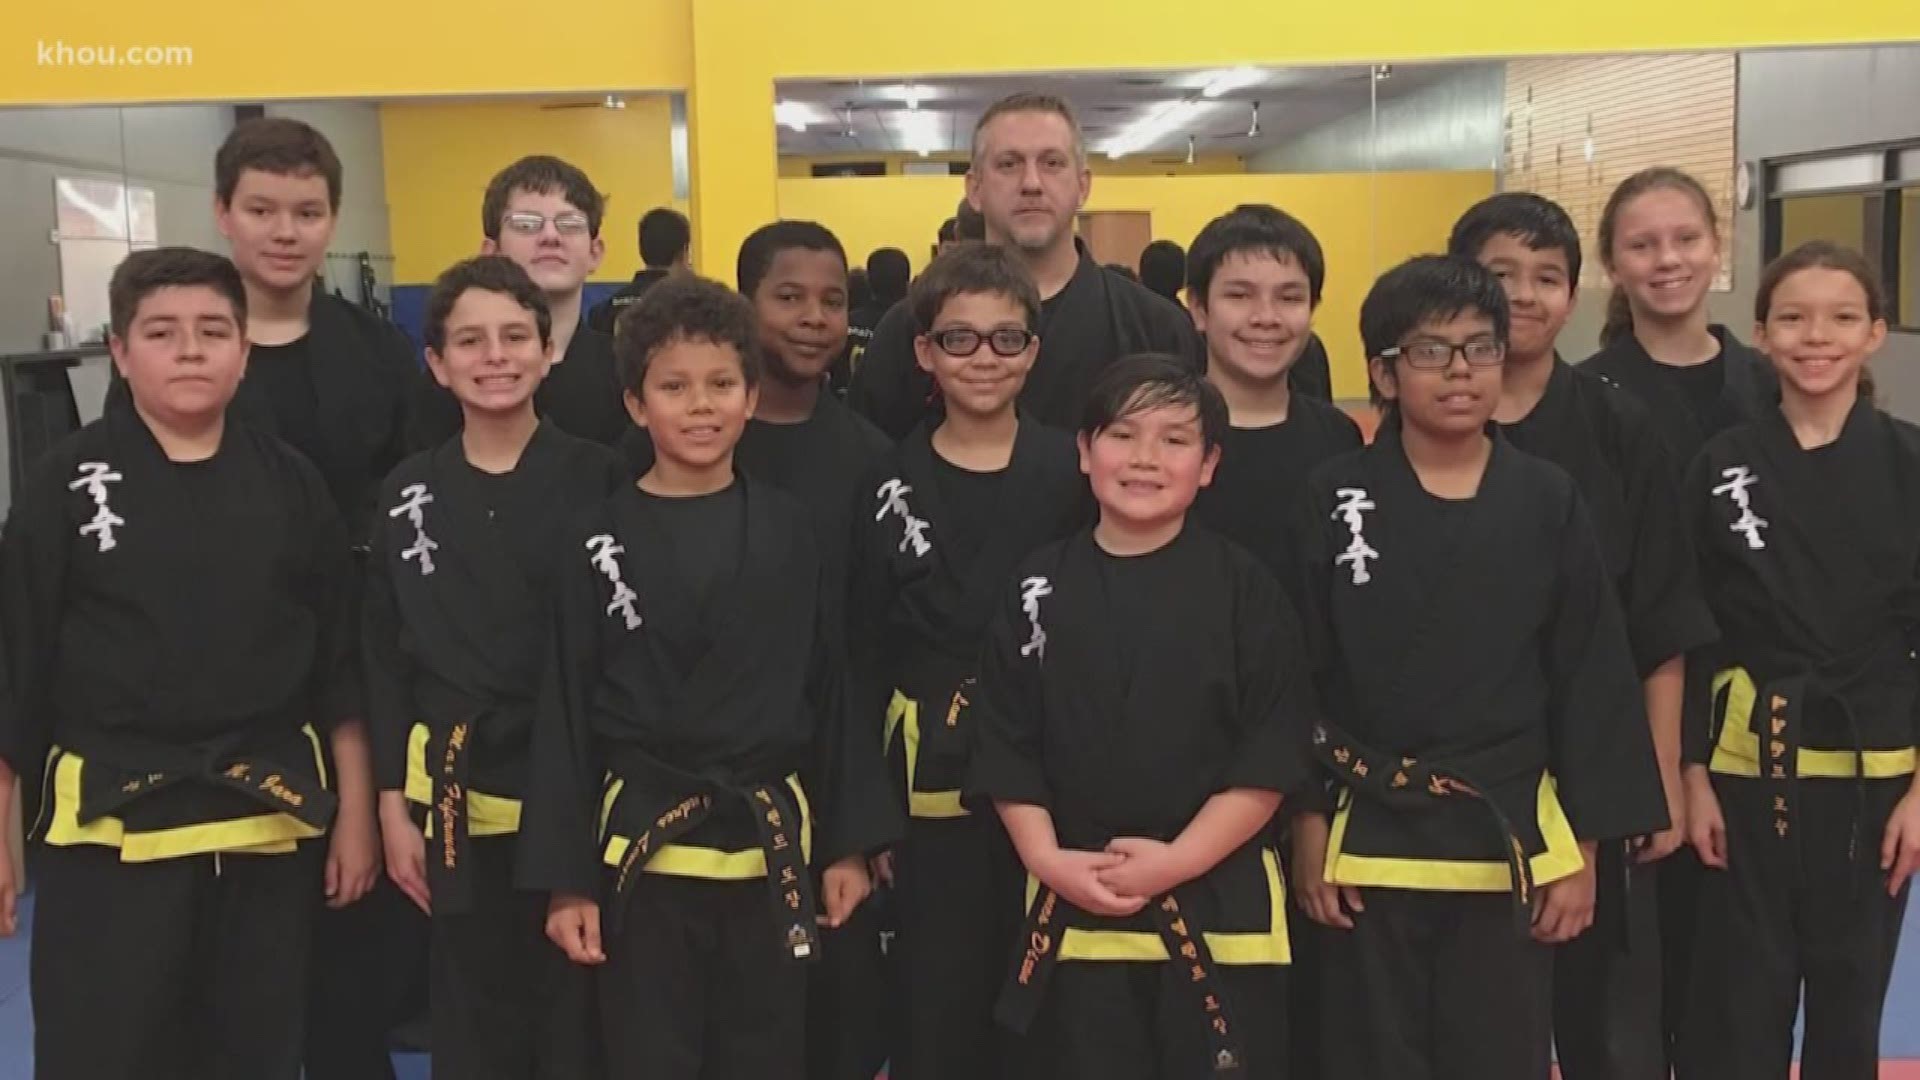 Michael Nebgen knew he had to do something to keep Meyerland Martial Arts afloat.